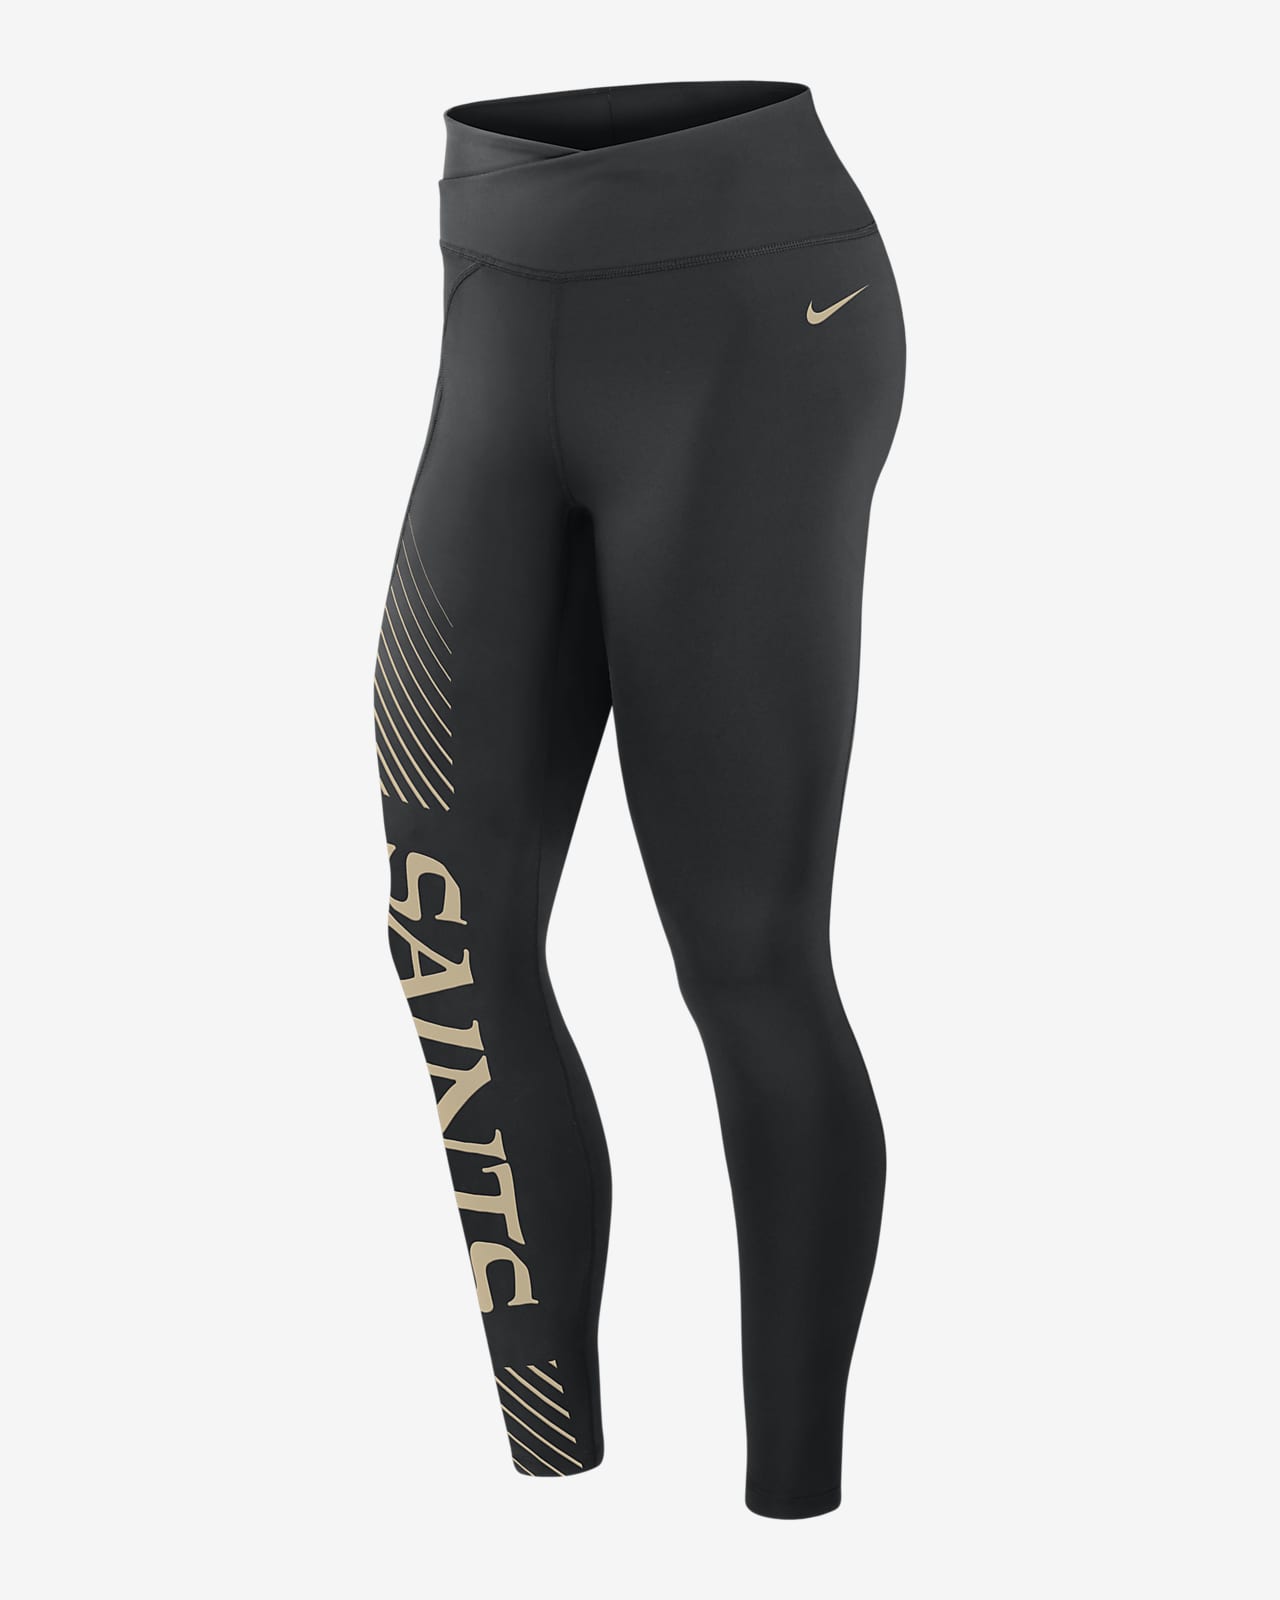 Nike Women's Fitted Synthetic Leggings